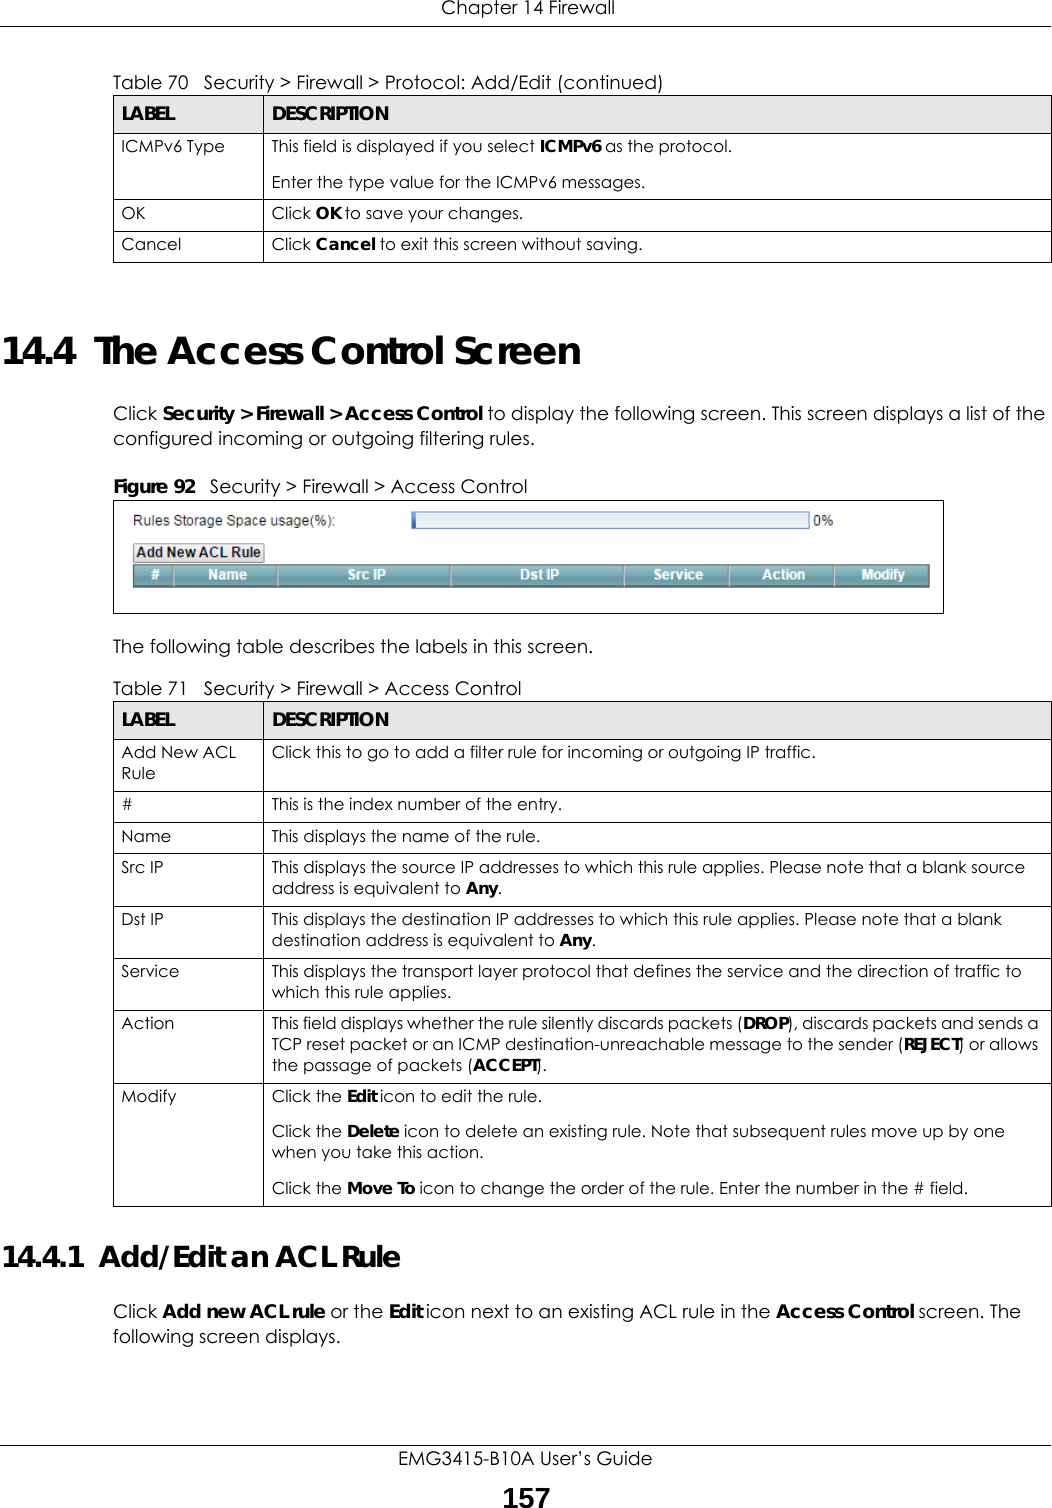  Chapter 14 FirewallEMG3415-B10A User’s Guide15714.4  The Access Control ScreenClick Security &gt; Firewall &gt; Access Control to display the following screen. This screen displays a list of the configured incoming or outgoing filtering rules. Figure 92   Security &gt; Firewall &gt; Access Control The following table describes the labels in this screen. 14.4.1  Add/Edit an ACL Rule   Click Add new ACL rule or the Edit icon next to an existing ACL rule in the Access Control screen. The following screen displays.ICMPv6 Type This field is displayed if you select ICMPv6 as the protocol.Enter the type value for the ICMPv6 messages.OK Click OK to save your changes.Cancel Click Cancel to exit this screen without saving.Table 70   Security &gt; Firewall &gt; Protocol: Add/Edit (continued)LABEL DESCRIPTIONTable 71   Security &gt; Firewall &gt; Access ControlLABEL DESCRIPTIONAdd New ACL RuleClick this to go to add a filter rule for incoming or outgoing IP traffic.#This is the index number of the entry.Name This displays the name of the rule.Src IP  This displays the source IP addresses to which this rule applies. Please note that a blank source address is equivalent to Any.Dst IP This displays the destination IP addresses to which this rule applies. Please note that a blank destination address is equivalent to Any.Service This displays the transport layer protocol that defines the service and the direction of traffic to which this rule applies. Action This field displays whether the rule silently discards packets (DROP), discards packets and sends a TCP reset packet or an ICMP destination-unreachable message to the sender (REJECT) or allows the passage of packets (ACCEPT).Modify Click the Edit icon to edit the rule.Click the Delete icon to delete an existing rule. Note that subsequent rules move up by one when you take this action.Click the Move To icon to change the order of the rule. Enter the number in the # field.